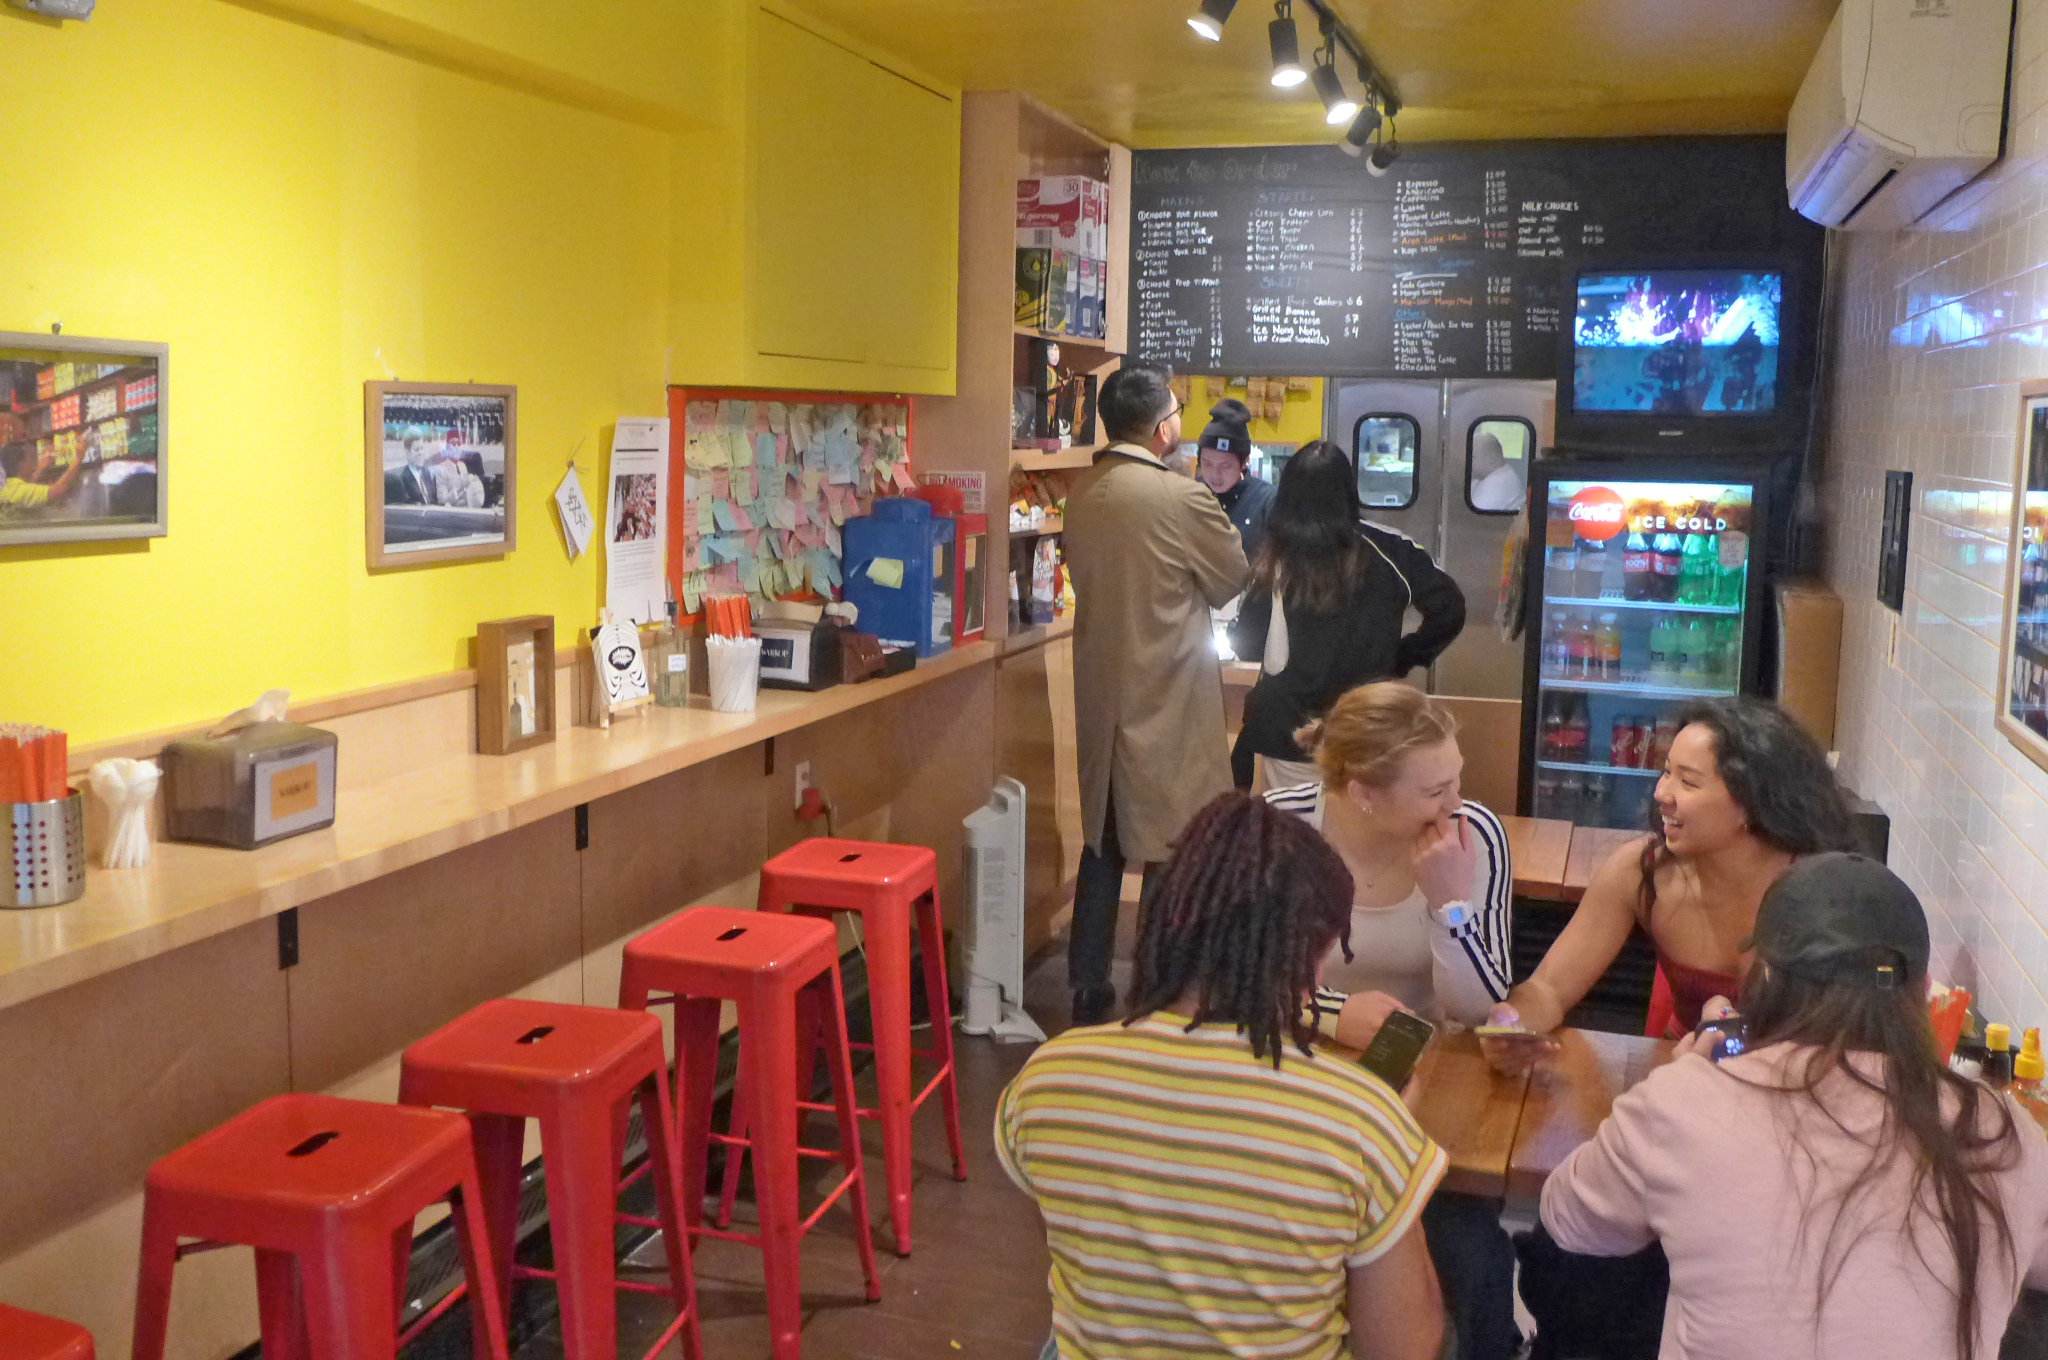 A yellow room with a table of laughing diners and an order counter at the rear with chalkboard menu.